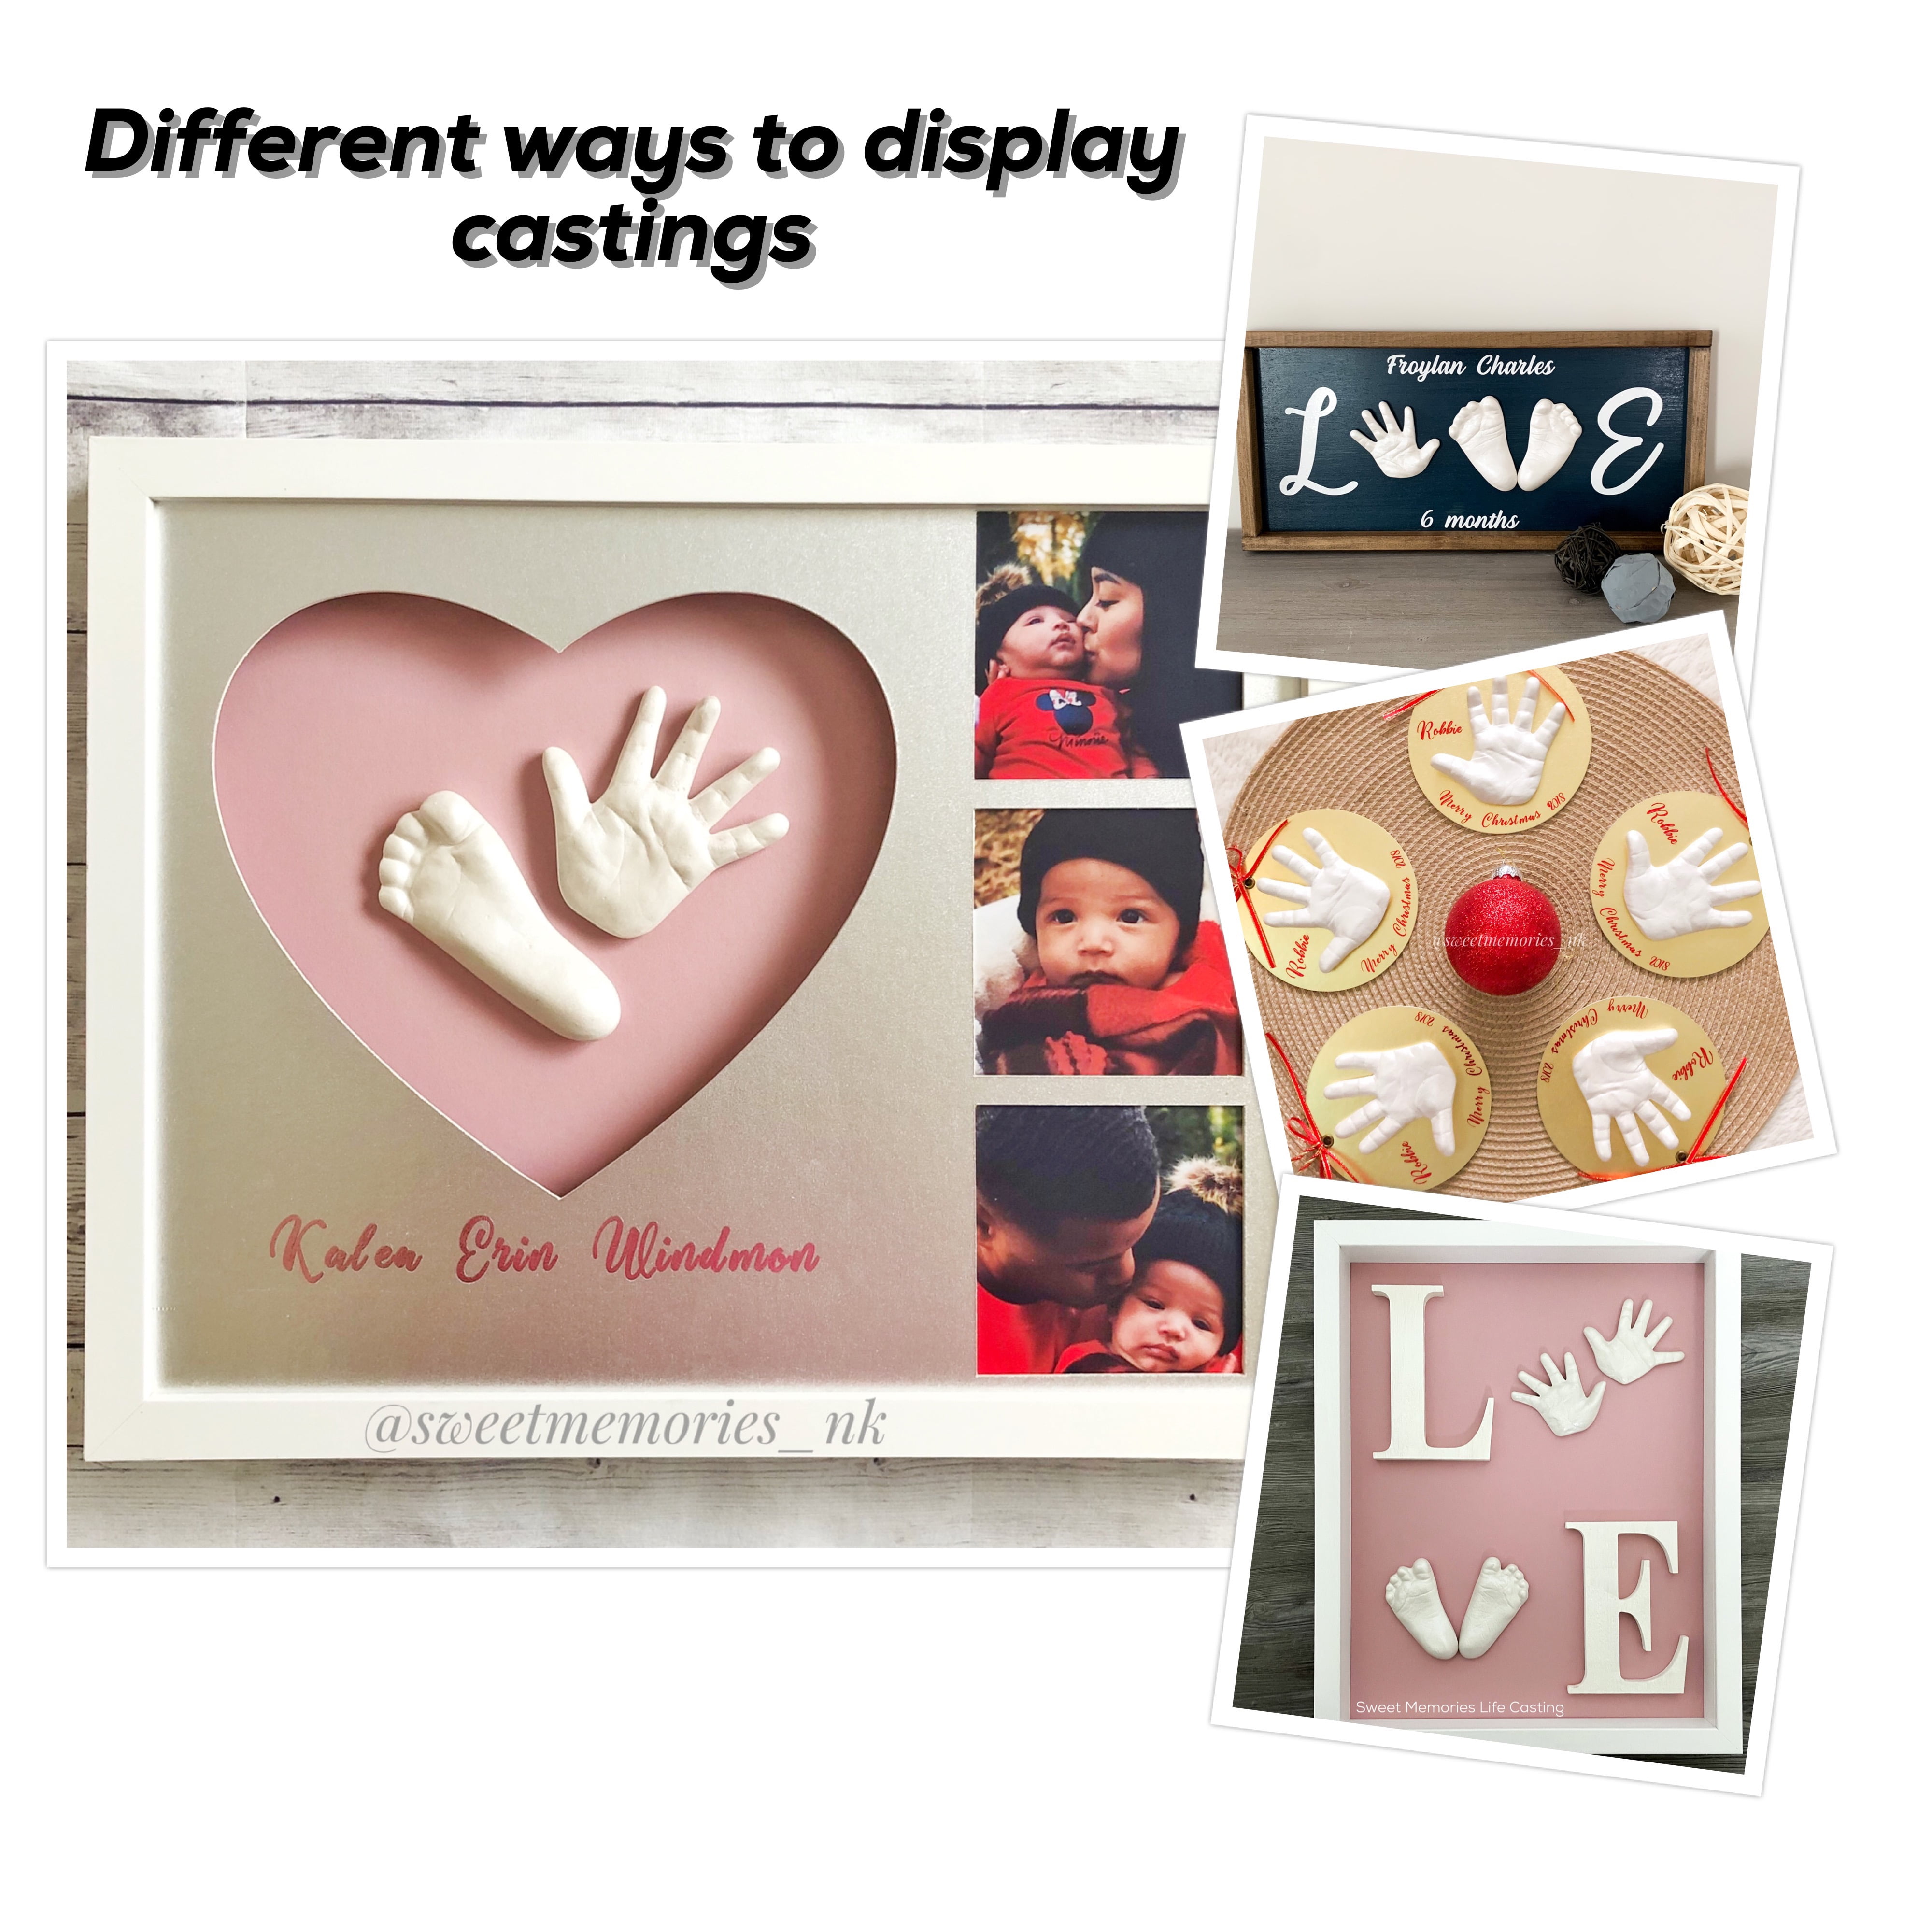 Special Classic 10x8 Double Photo Frame Baby Casting Kit